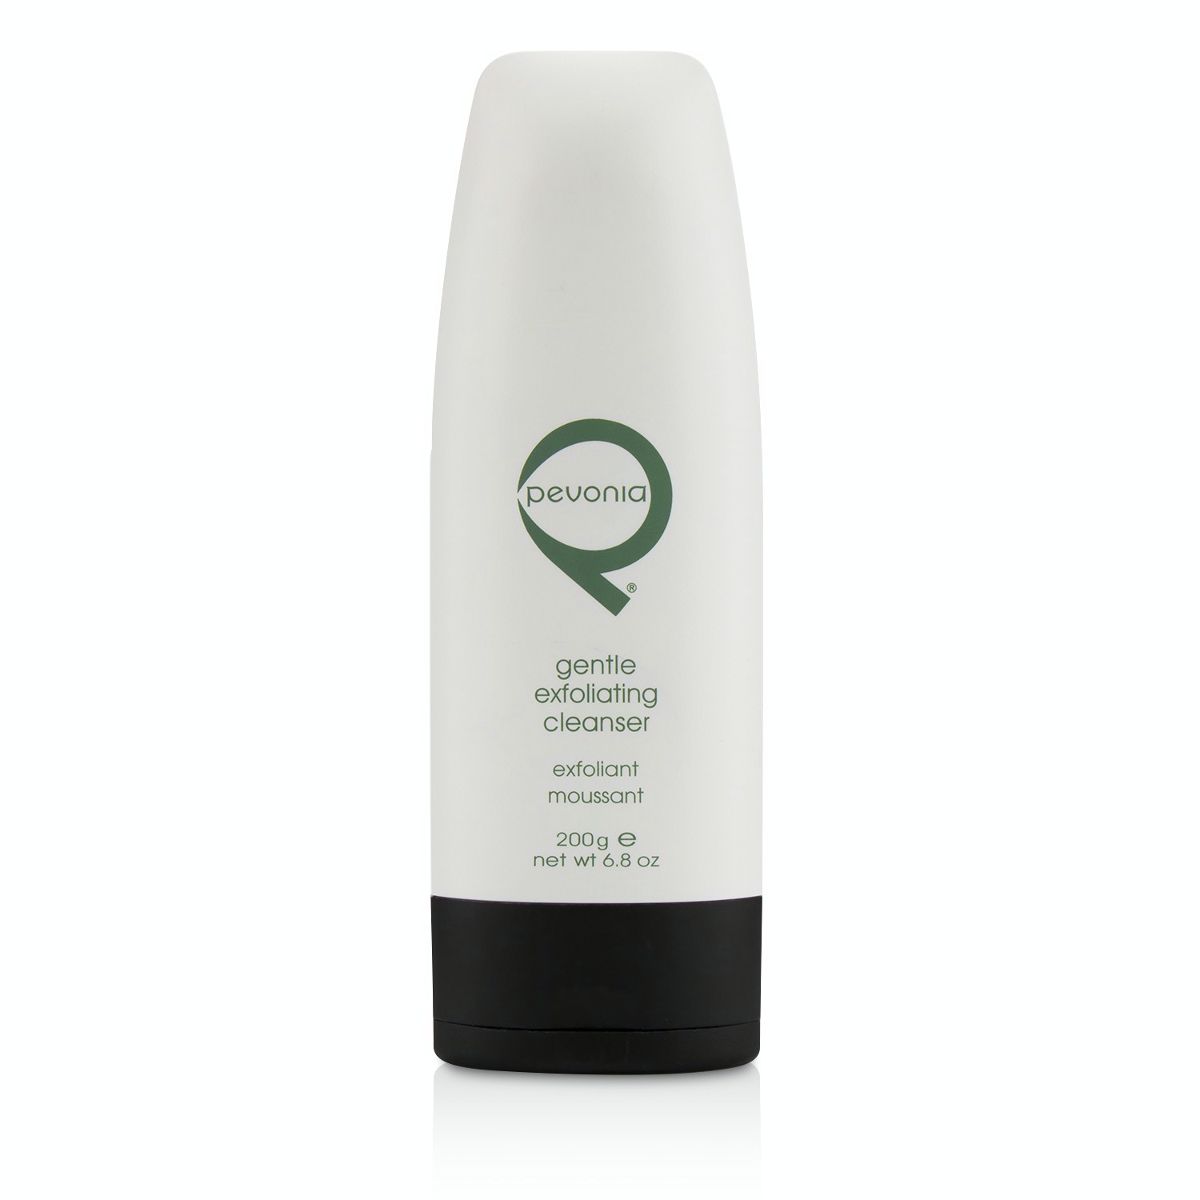 Gentle Exfoliating Cleanser (New Packaging Salon Size) Pevonia Botanica Image